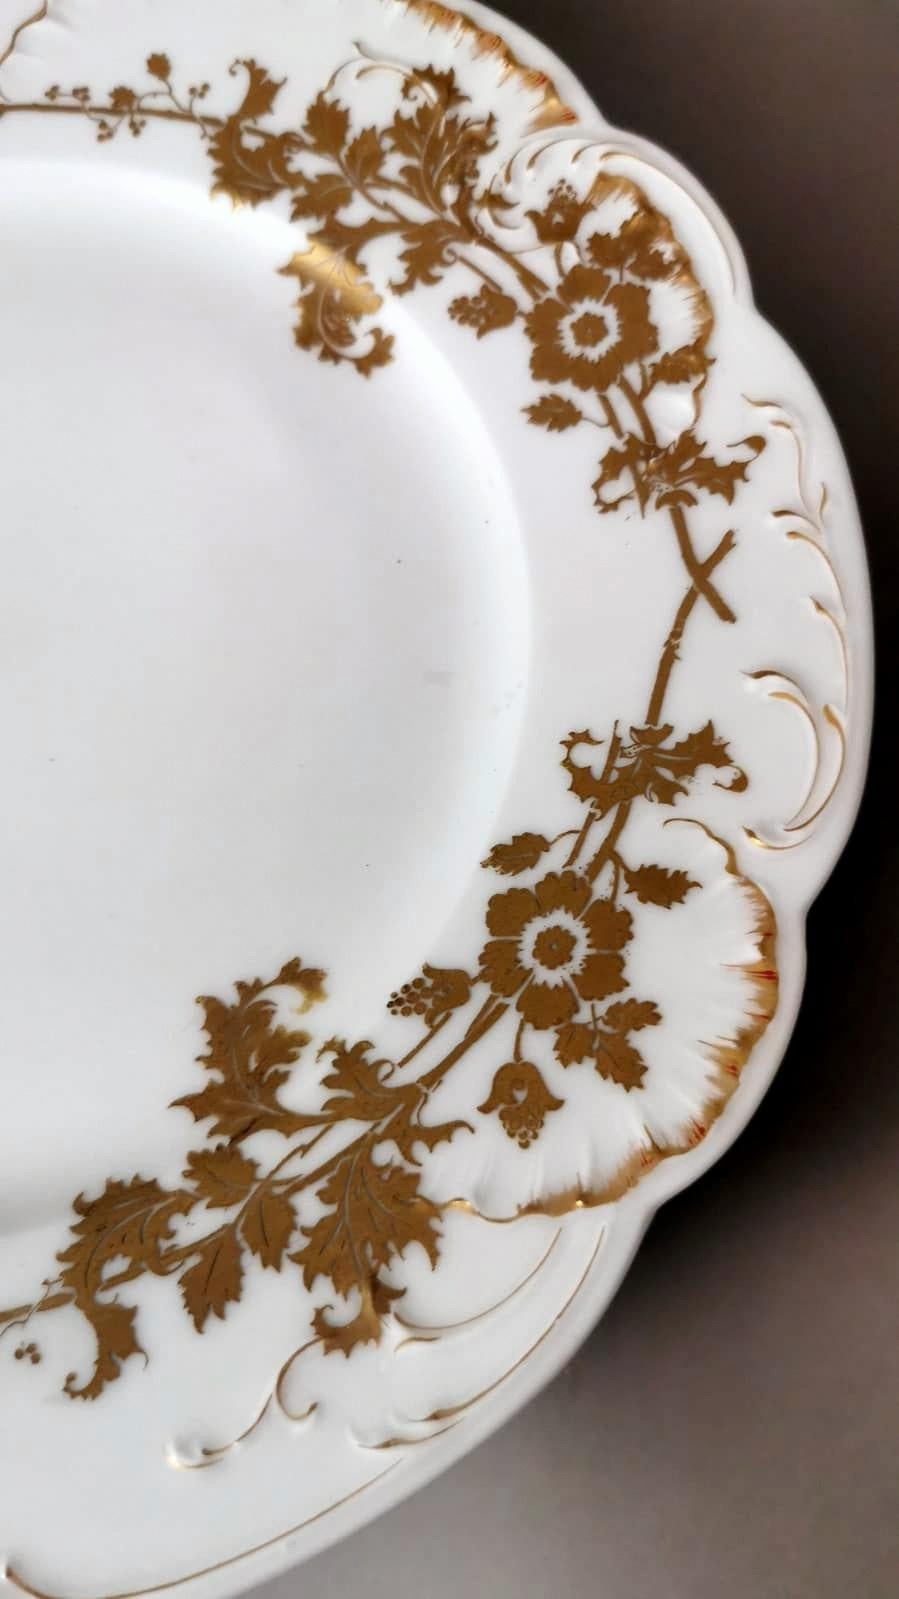 Haviland Limoges 6 French White Porcelain Flat Plates and Gold Decorations For Sale 7